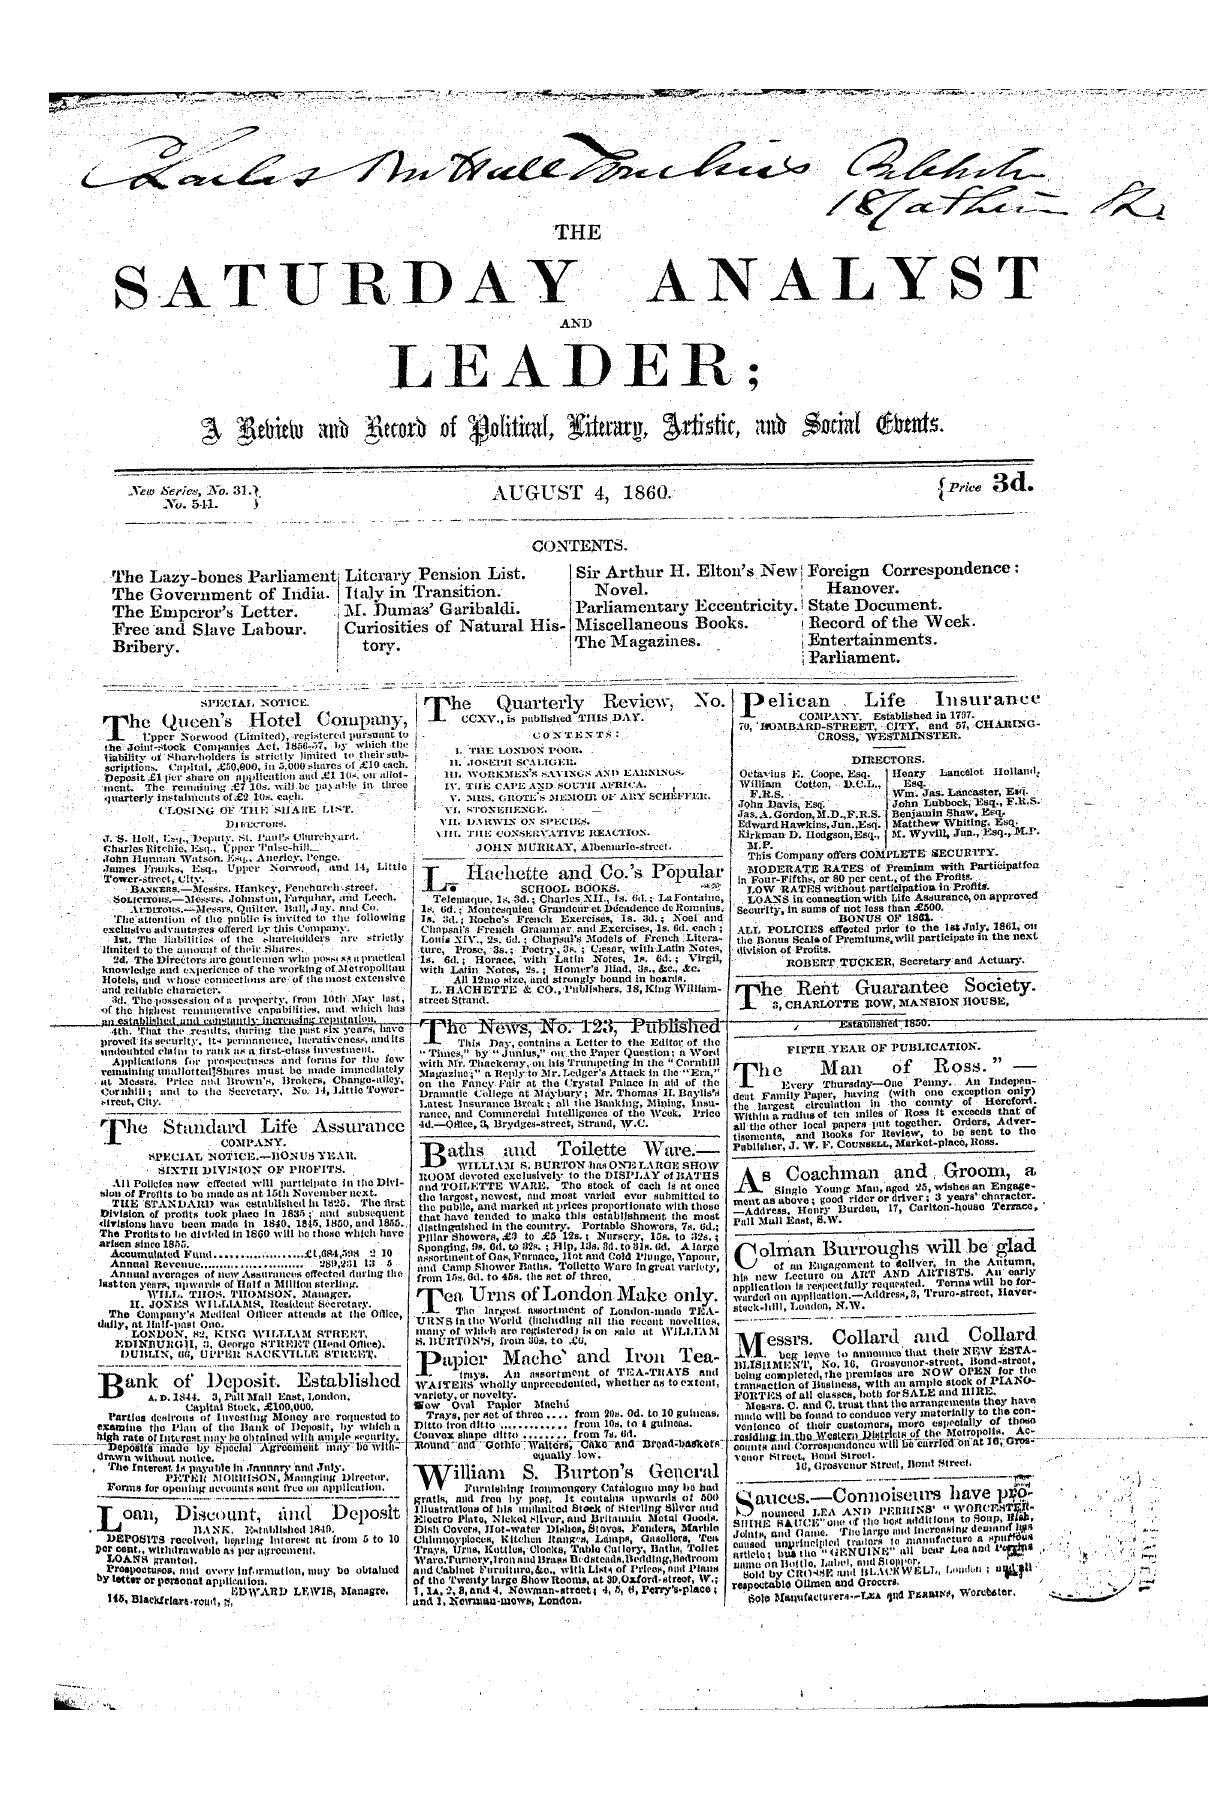 Leader (1850-1860): jS F Y, 1st edition - Special Notice. ! The Queen's Hotel Company, ' Uppernorwood (Limited), -Registered Pursuant To J Hich Tin